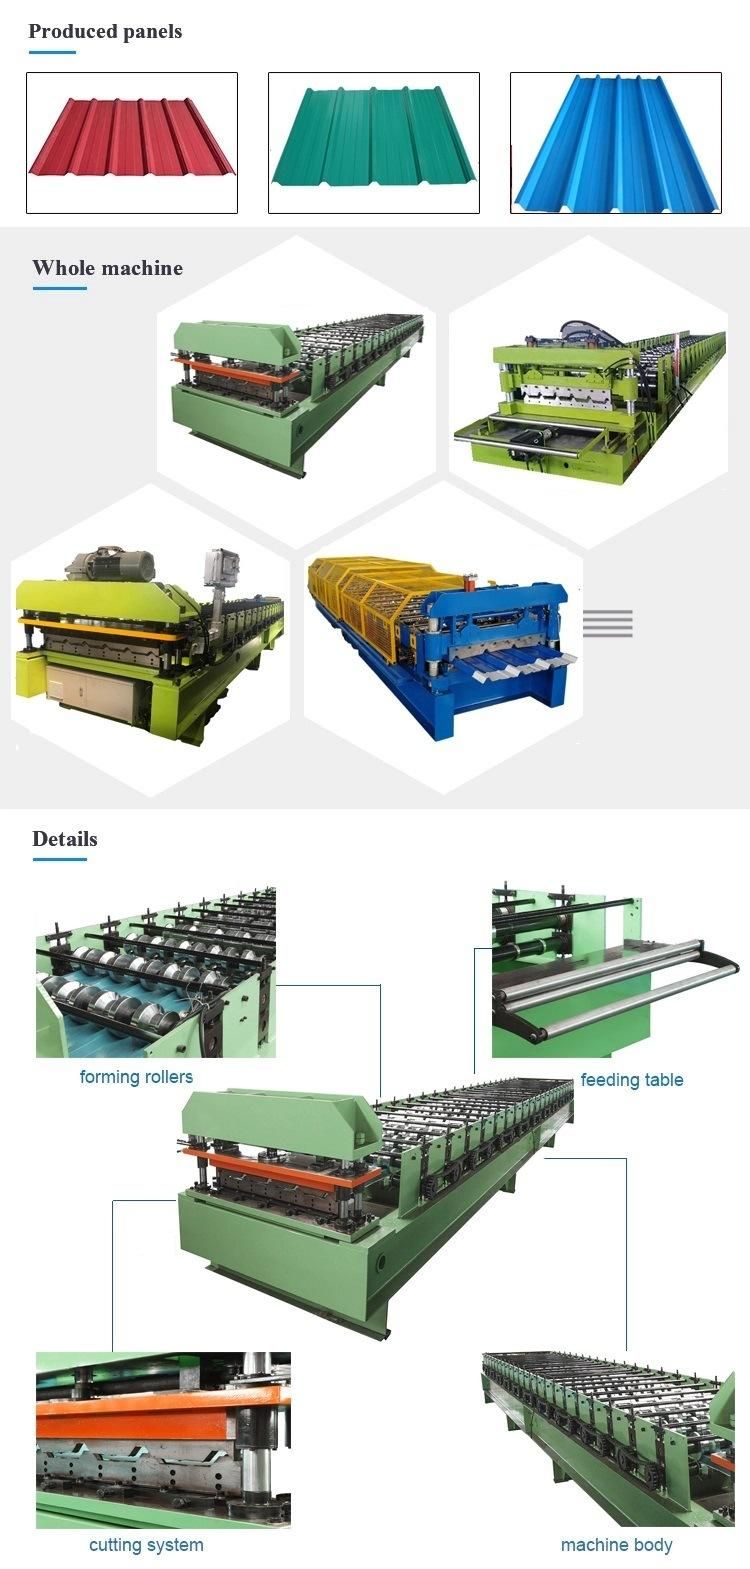 Popular Ibr Roof Sheeting Trapezoidal Profile Color Steel Roll Forming Machine/Trapezoidal Roof Tile Making Machine